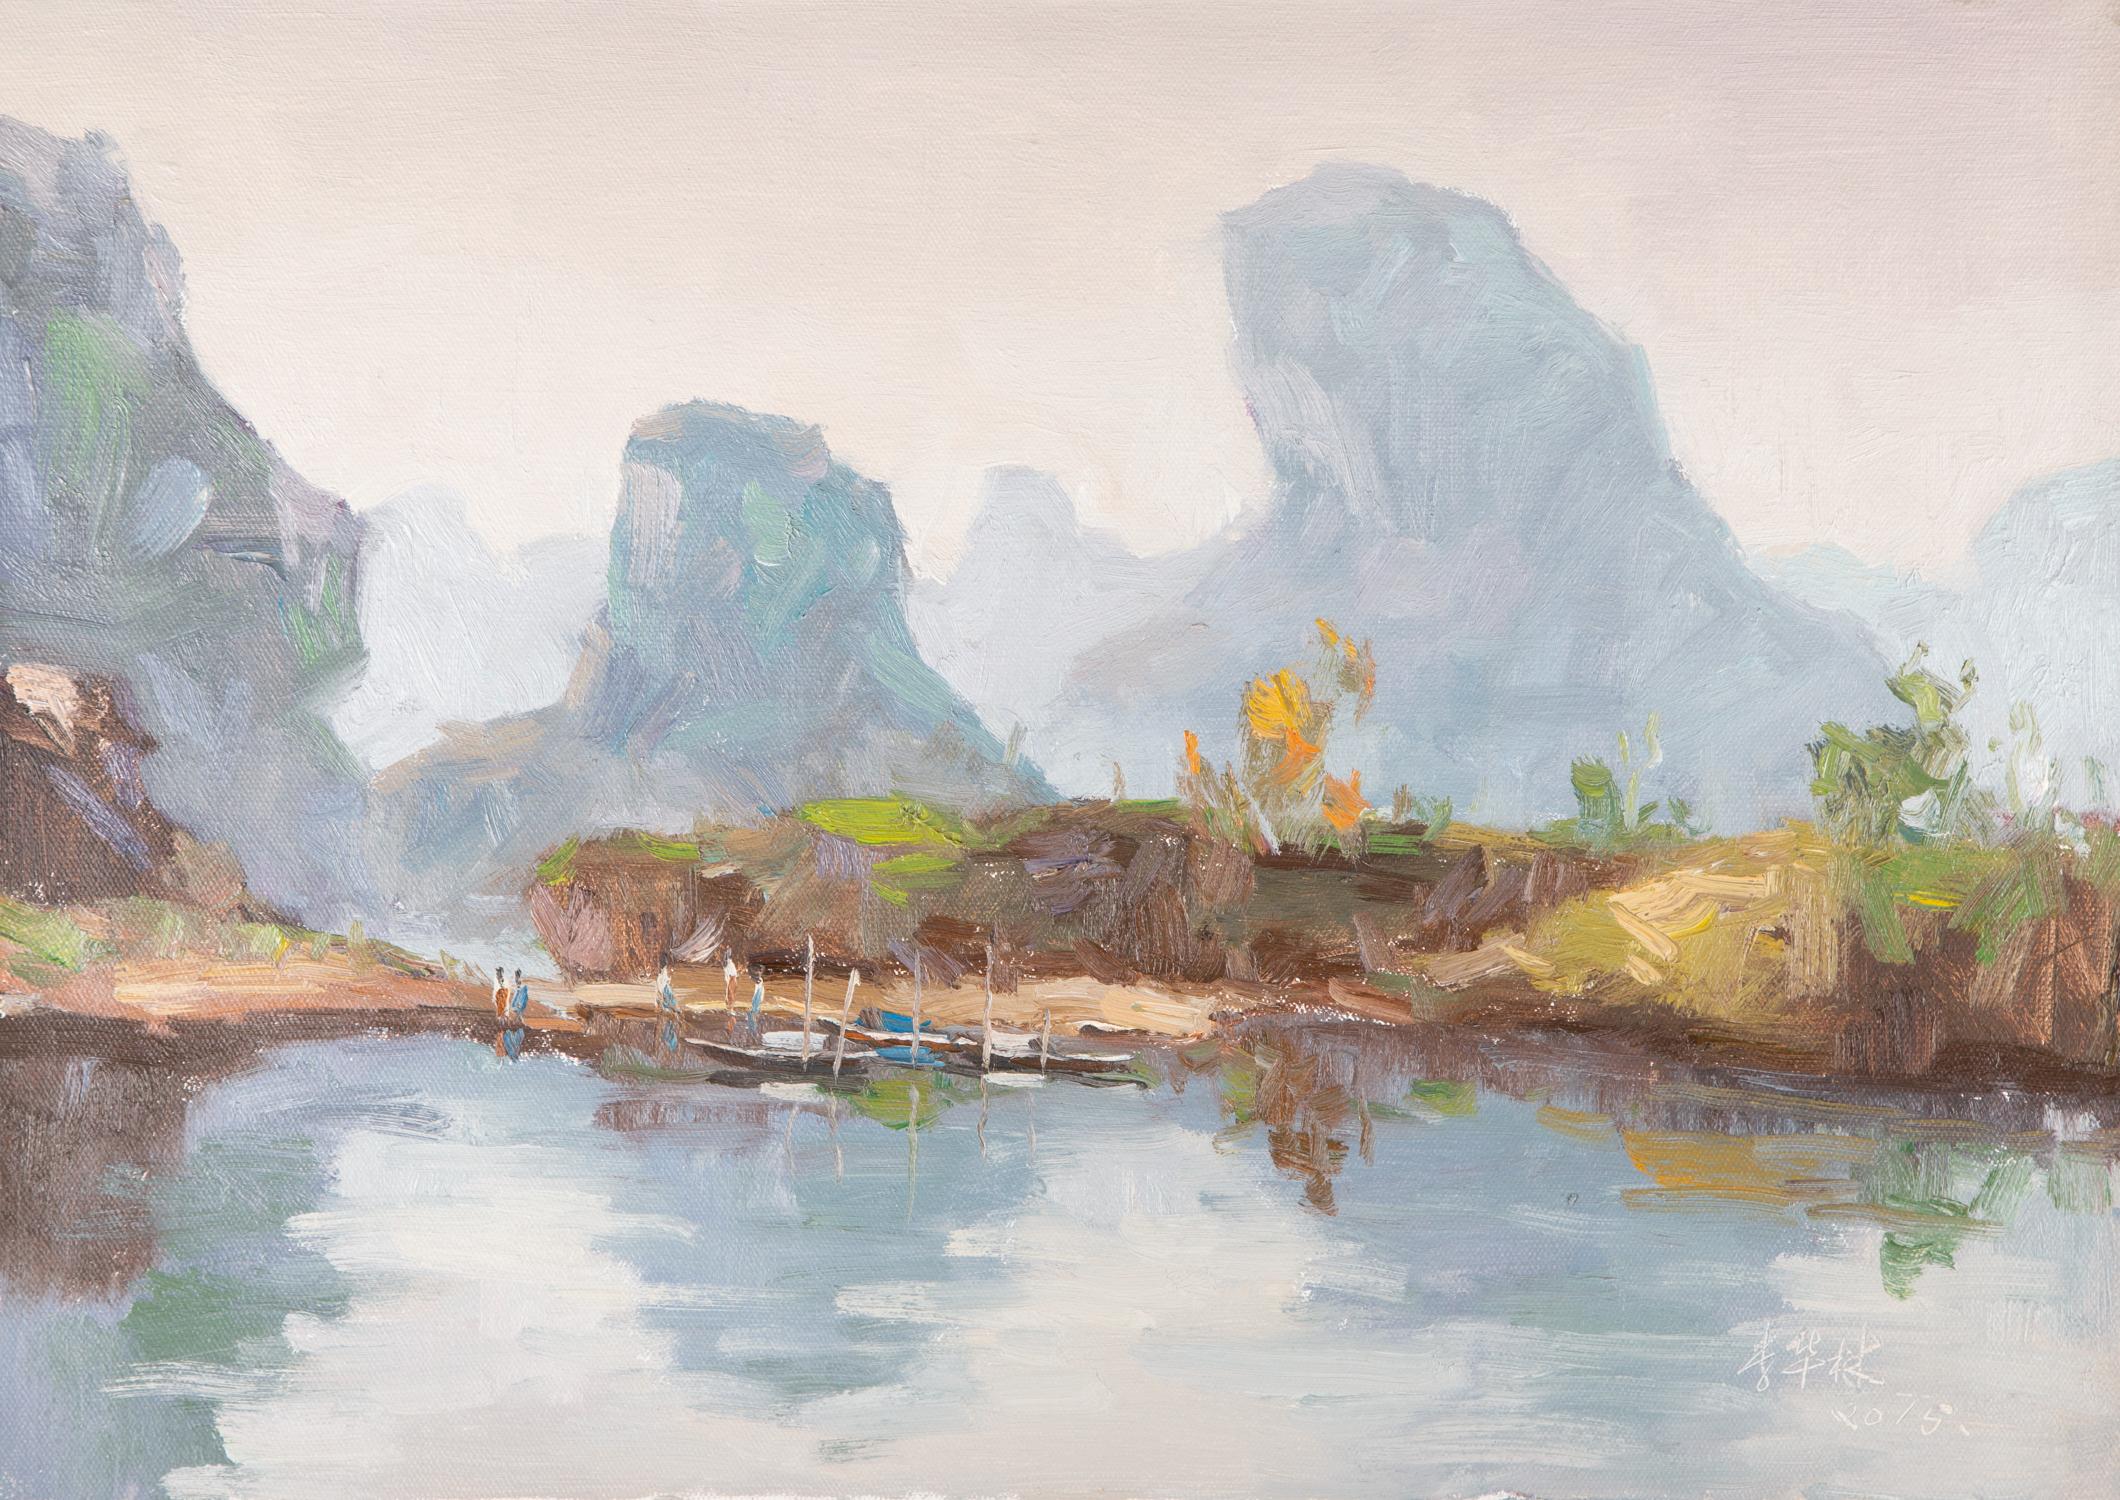  Title: Lakeside Hiking
 Medium: Oil on canvas
 Size: 27.5 x 19.5 inches
 Frame: Framing options available!
 Age: 2000s
 Condition: Painting appears to be in excellent condition.
 Note: This painting is unstretched
 Artist: Hualin Li
 Provenance: